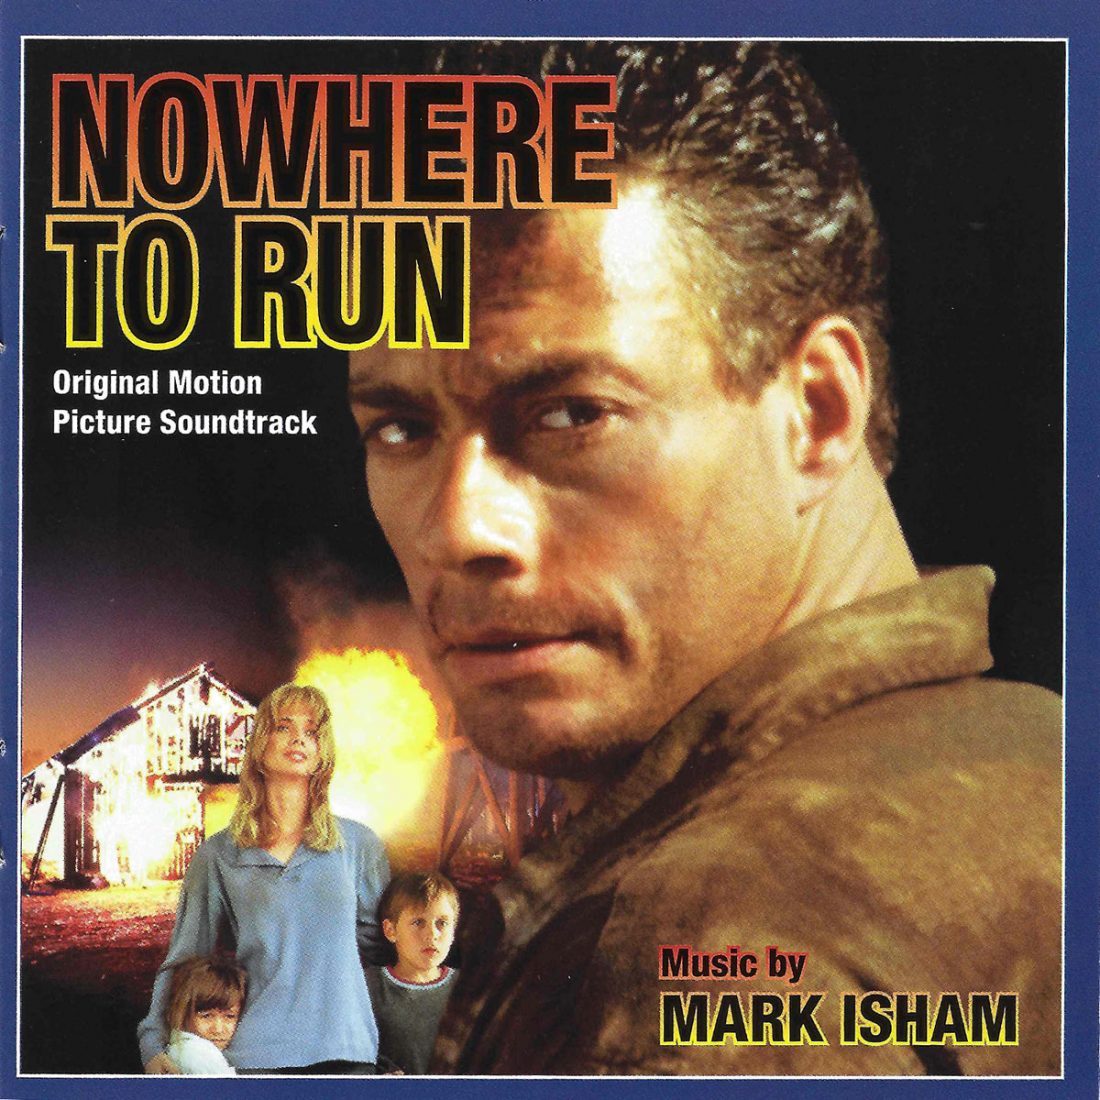 Nowhere to Run Limited Edition Original Motion Picture Soundtrack